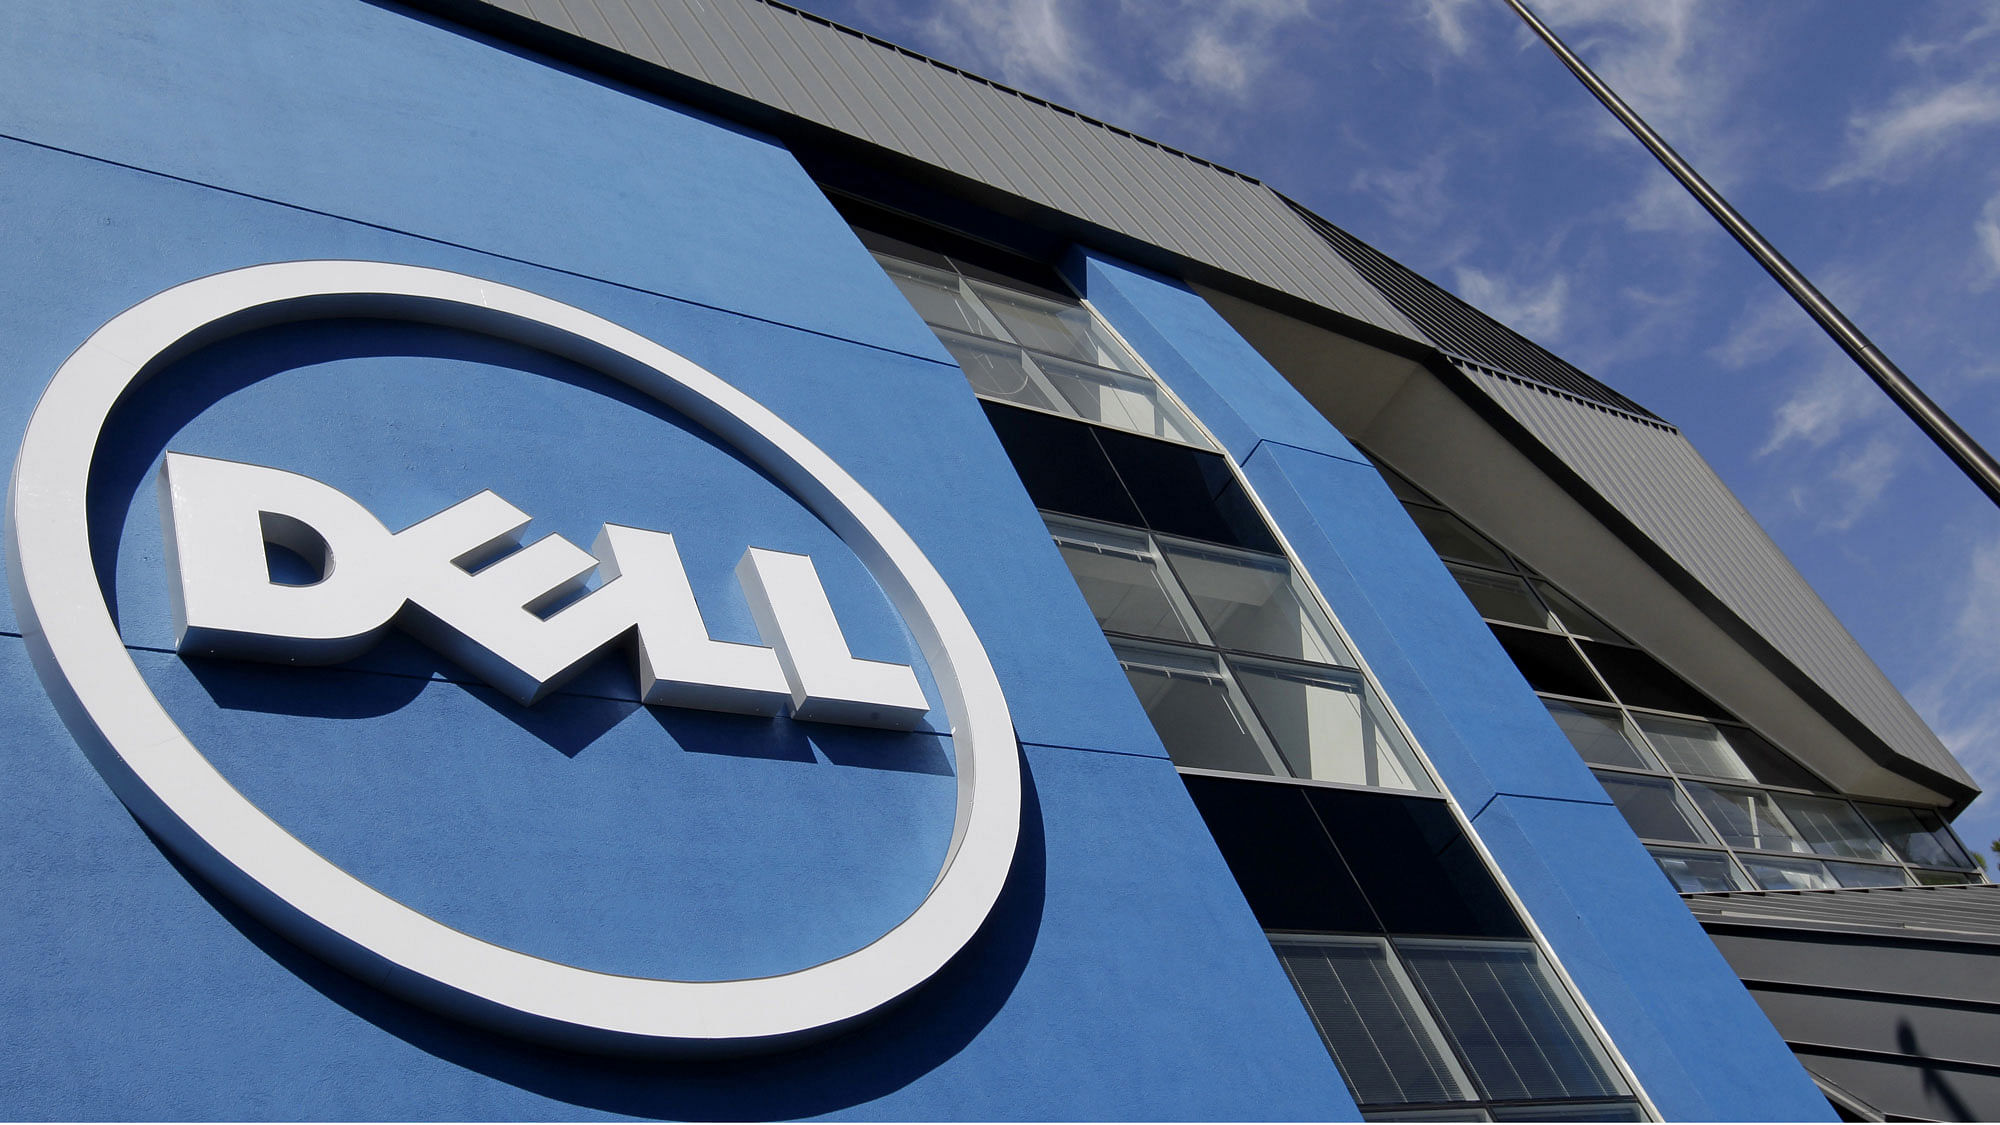 The acquisition marks Dell’s latest attempt to lessen its dependence on the PC industry. (Photo: AP)